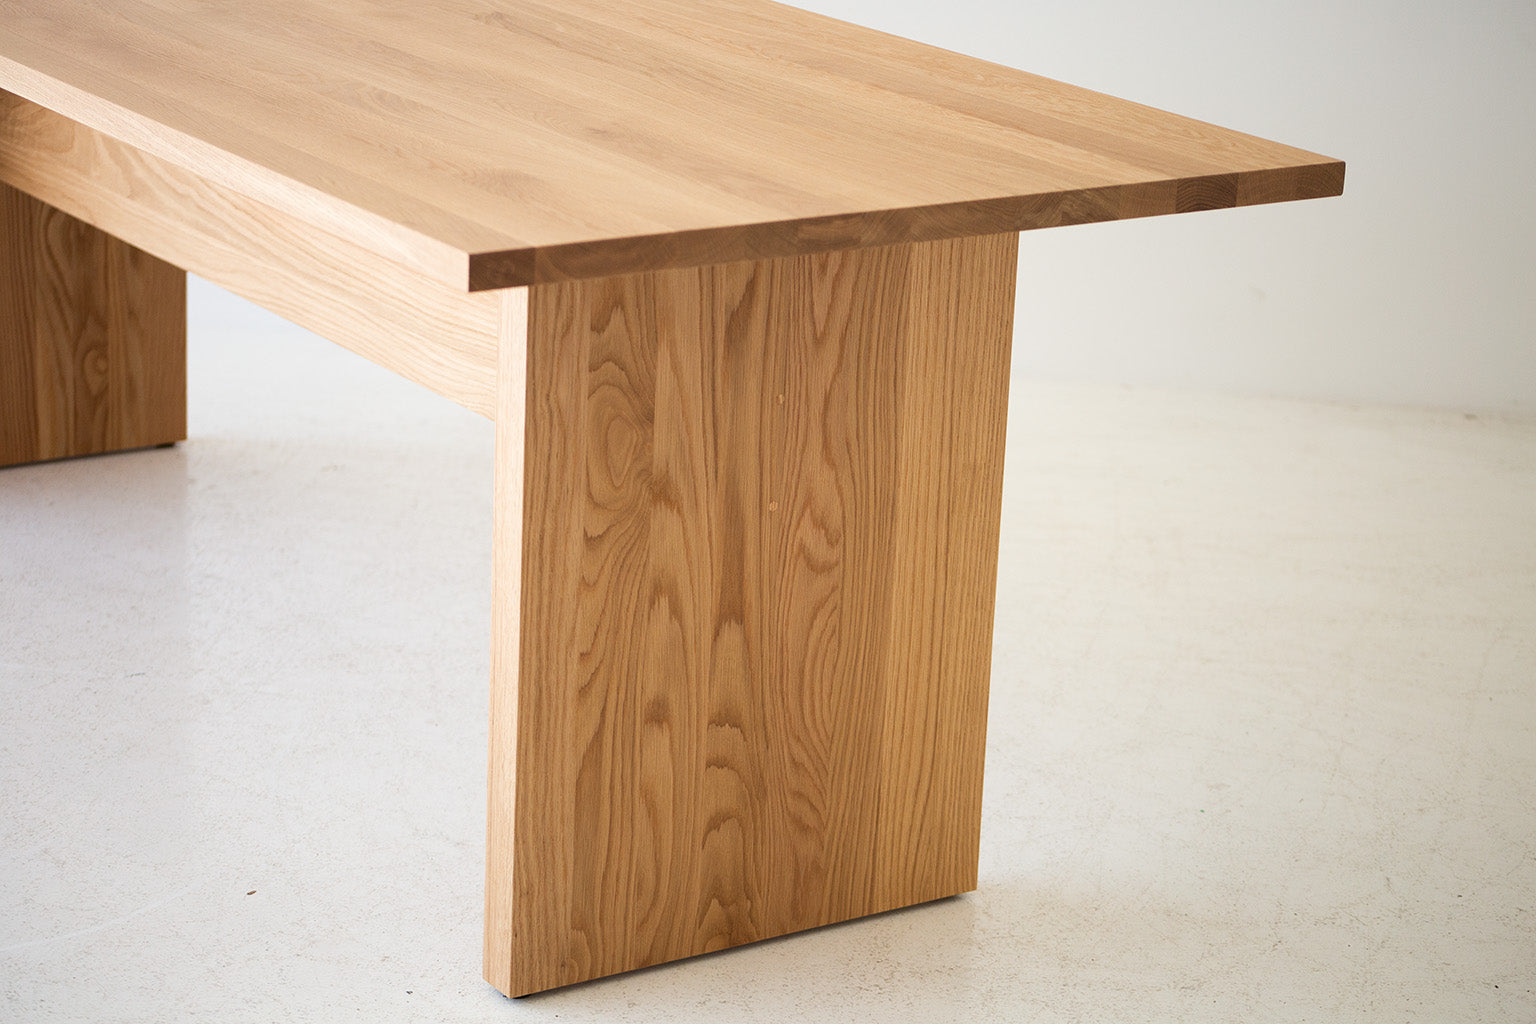 White Oak Dining Table - The Toko - 2922